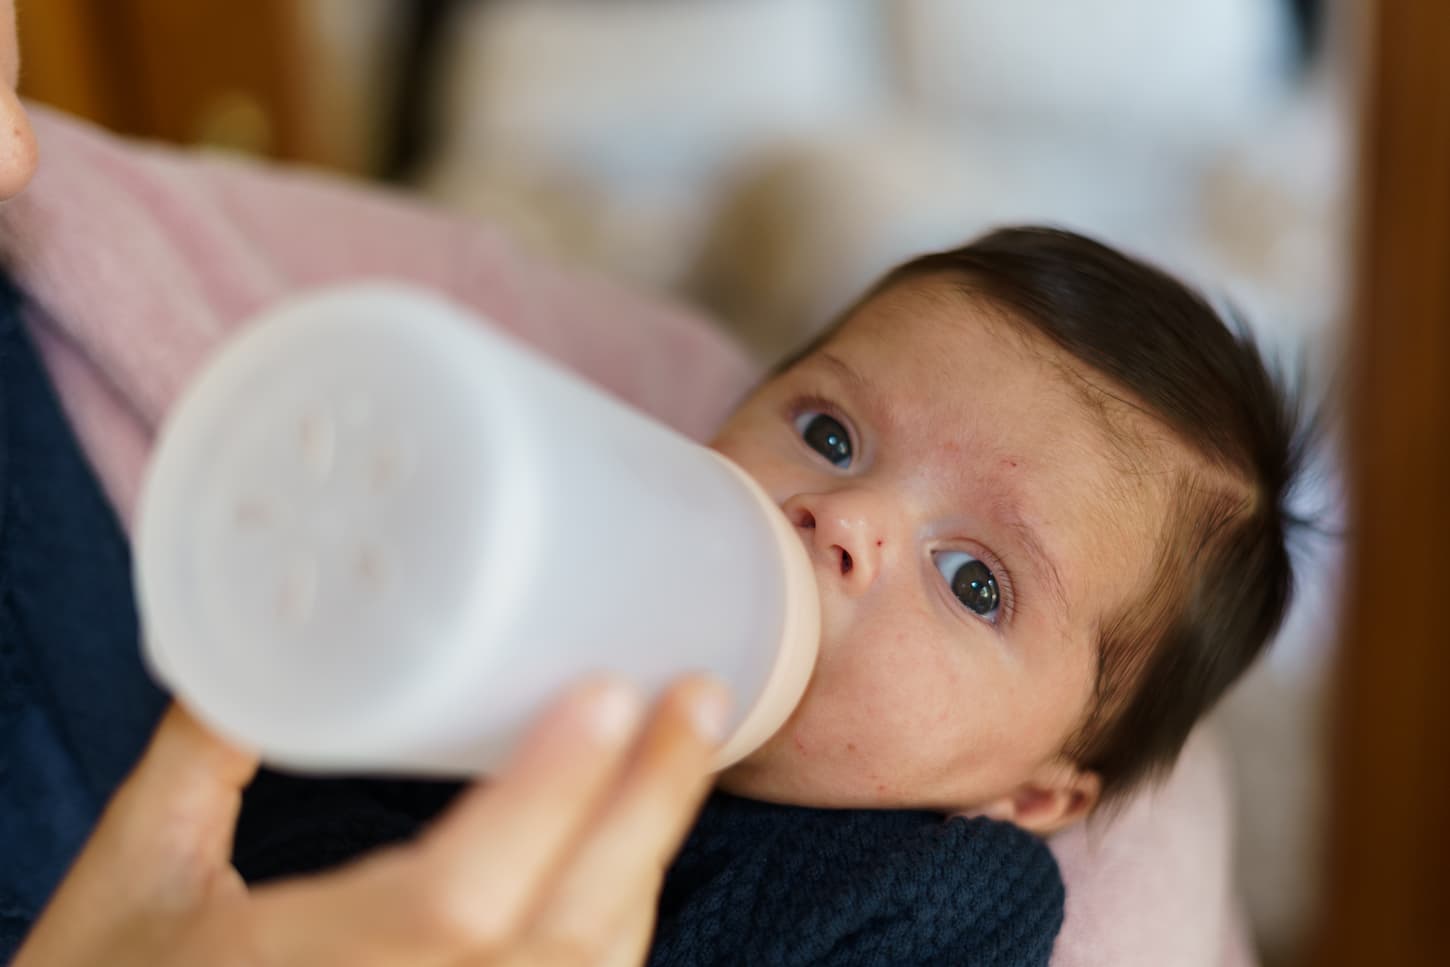 An image of a newborn baby feeding on a bottle of milk while looking at the camera.